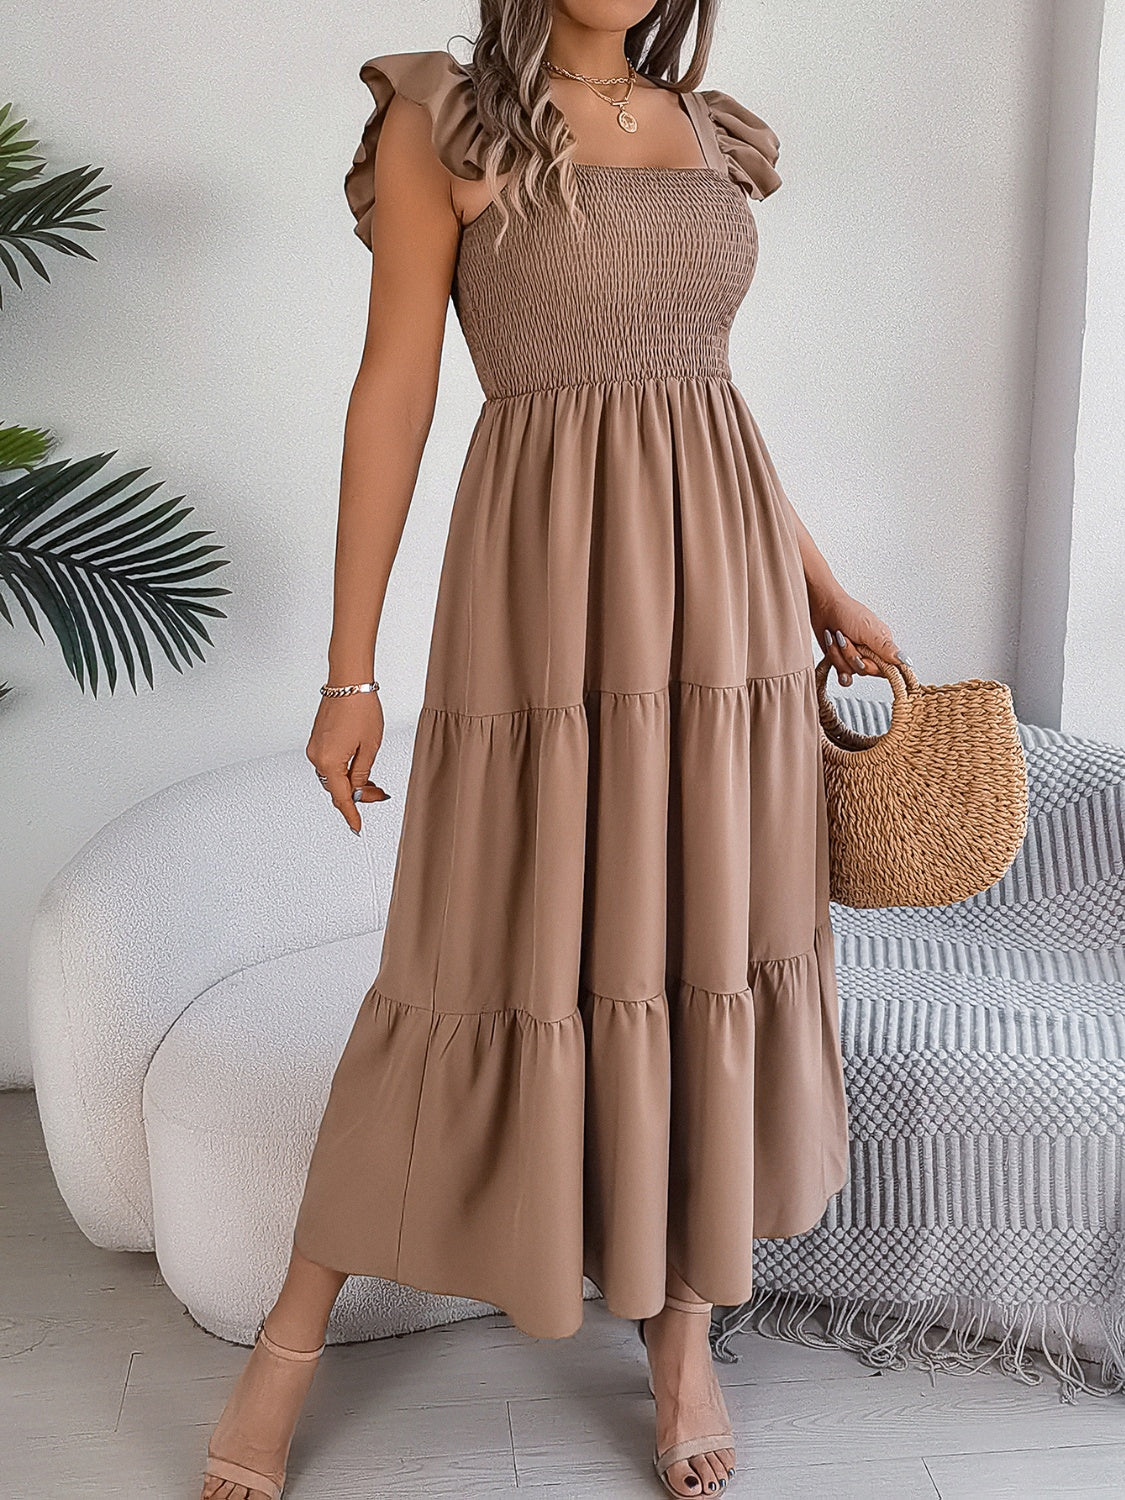 Smocked Square Neck Cap Sleeve Midi Dress Southern Soul Collectives